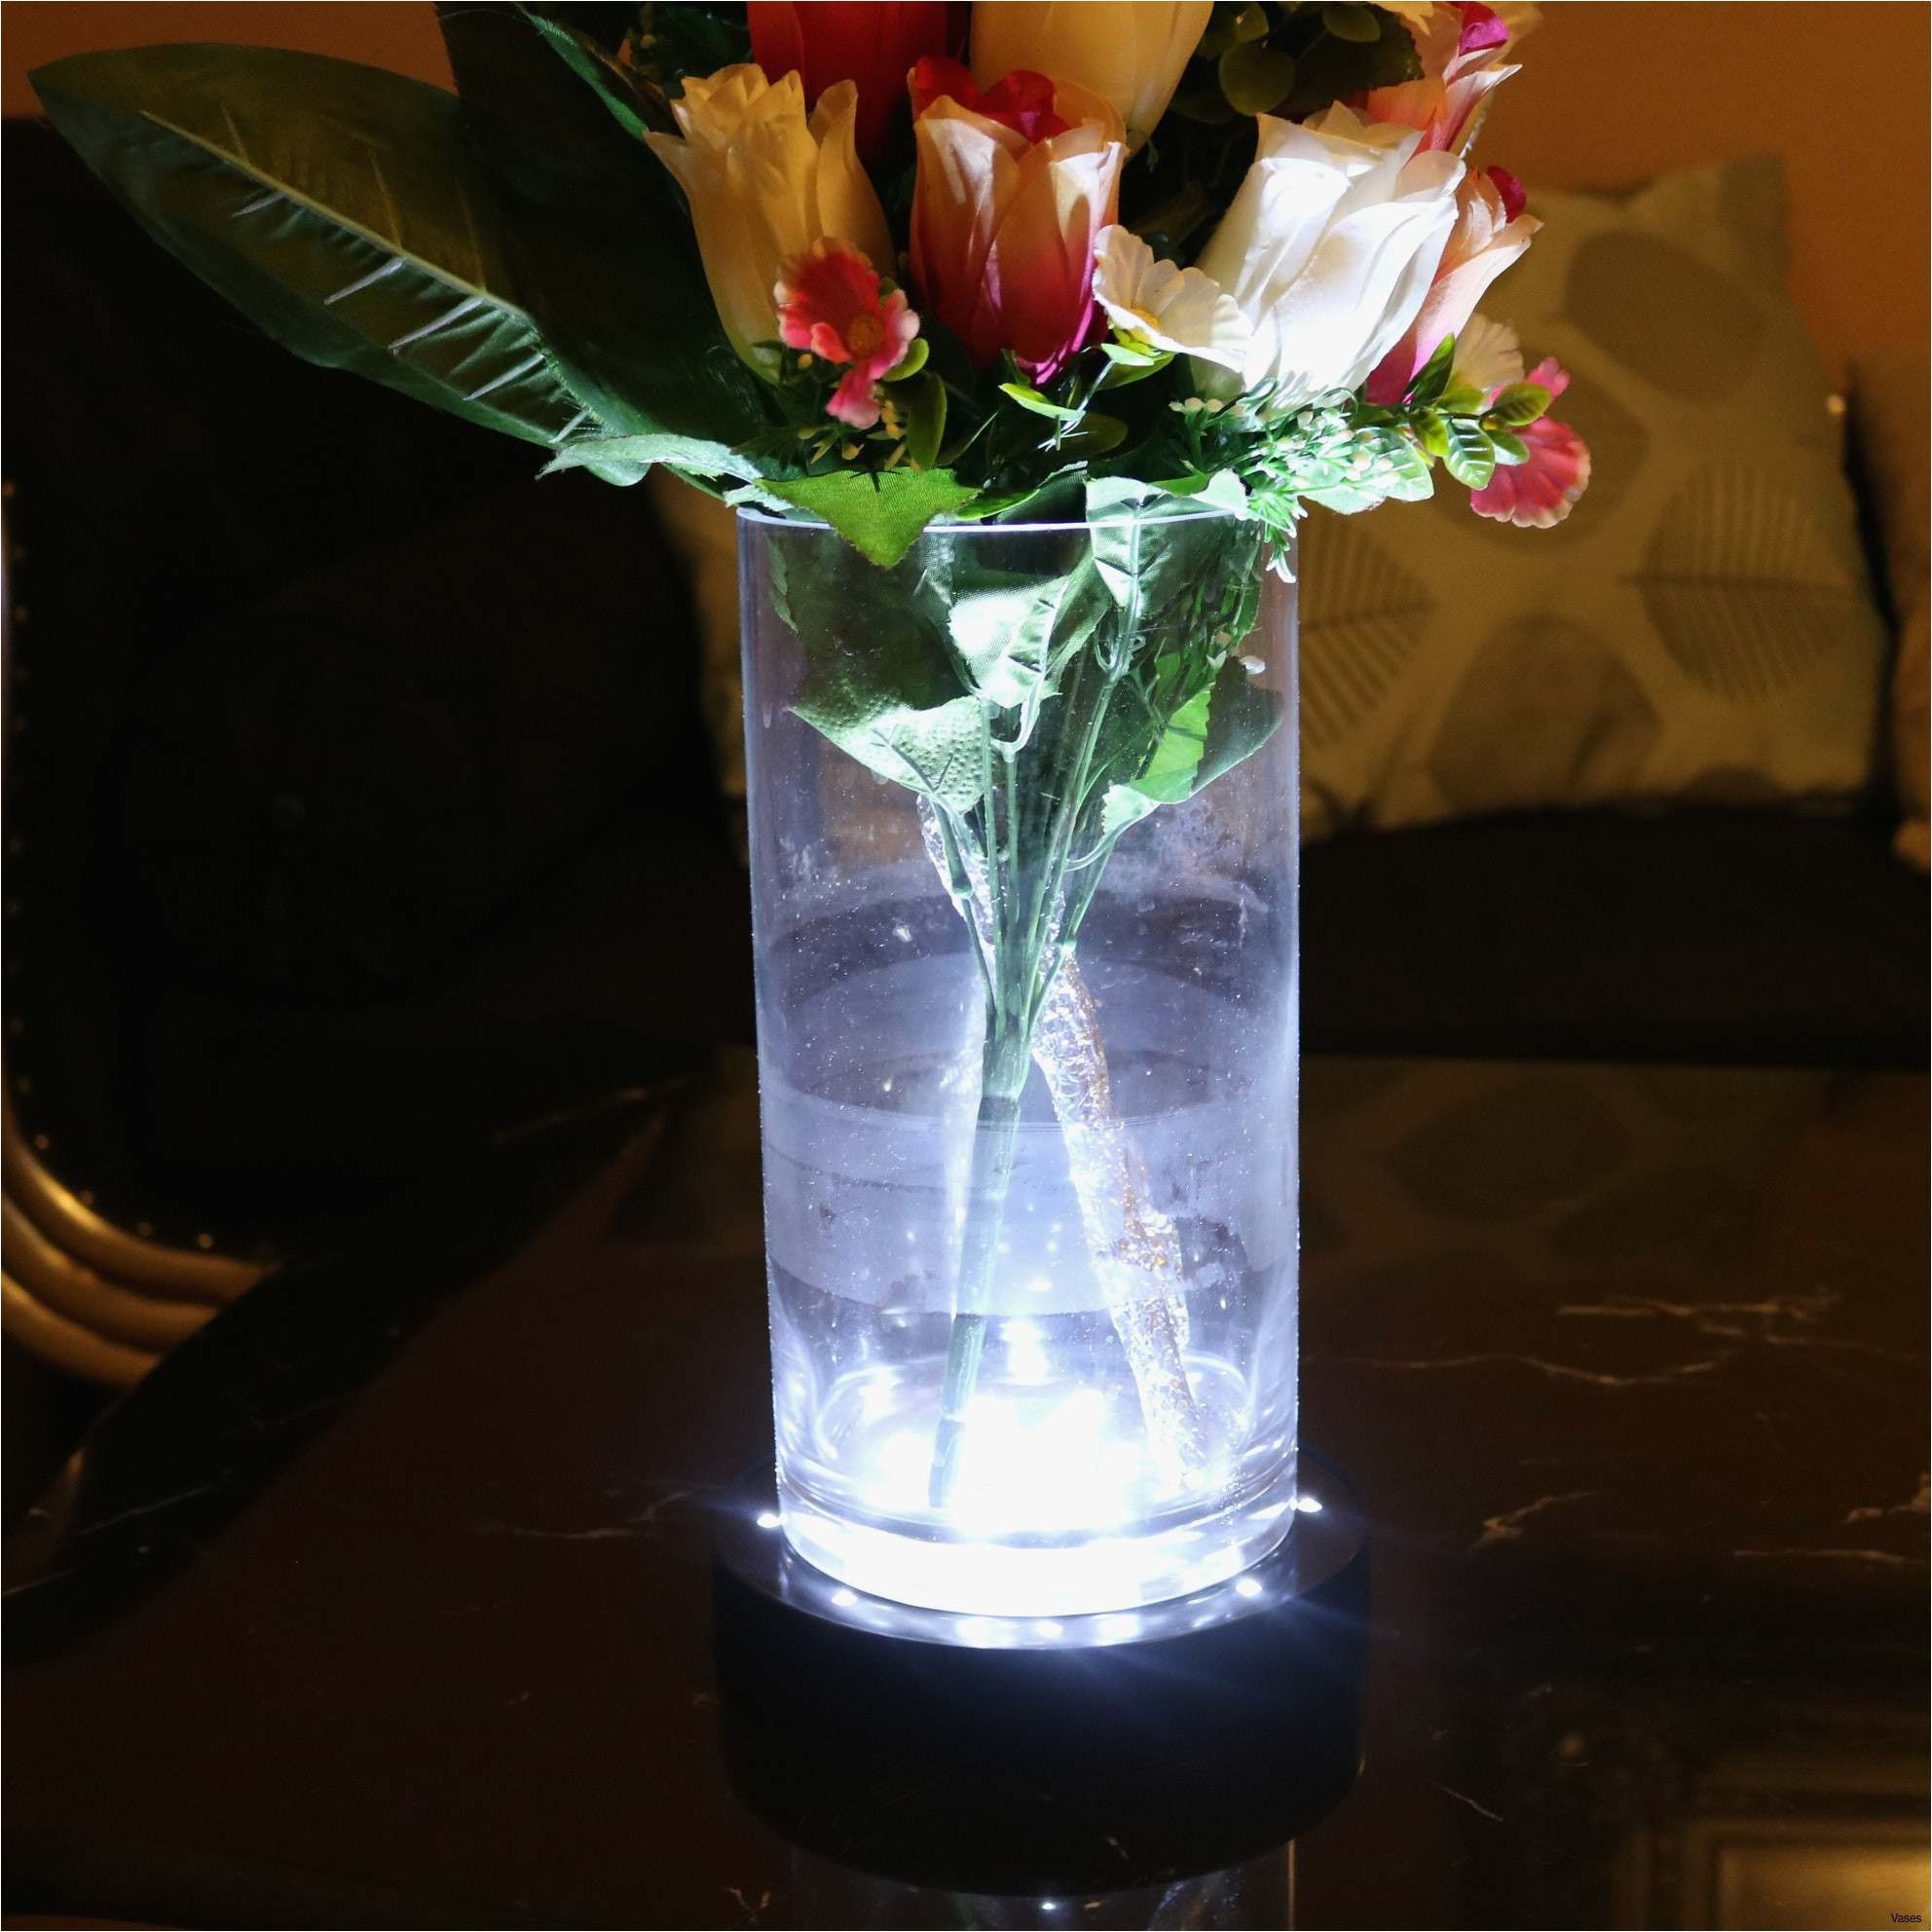 25 attractive Contemporary Floor Vases 2024 free download contemporary floor vases of reception flowers photo vases disposable plastic single cheap flower pertaining to reception flowers top search vases disposable plastic single cheap flower rose 